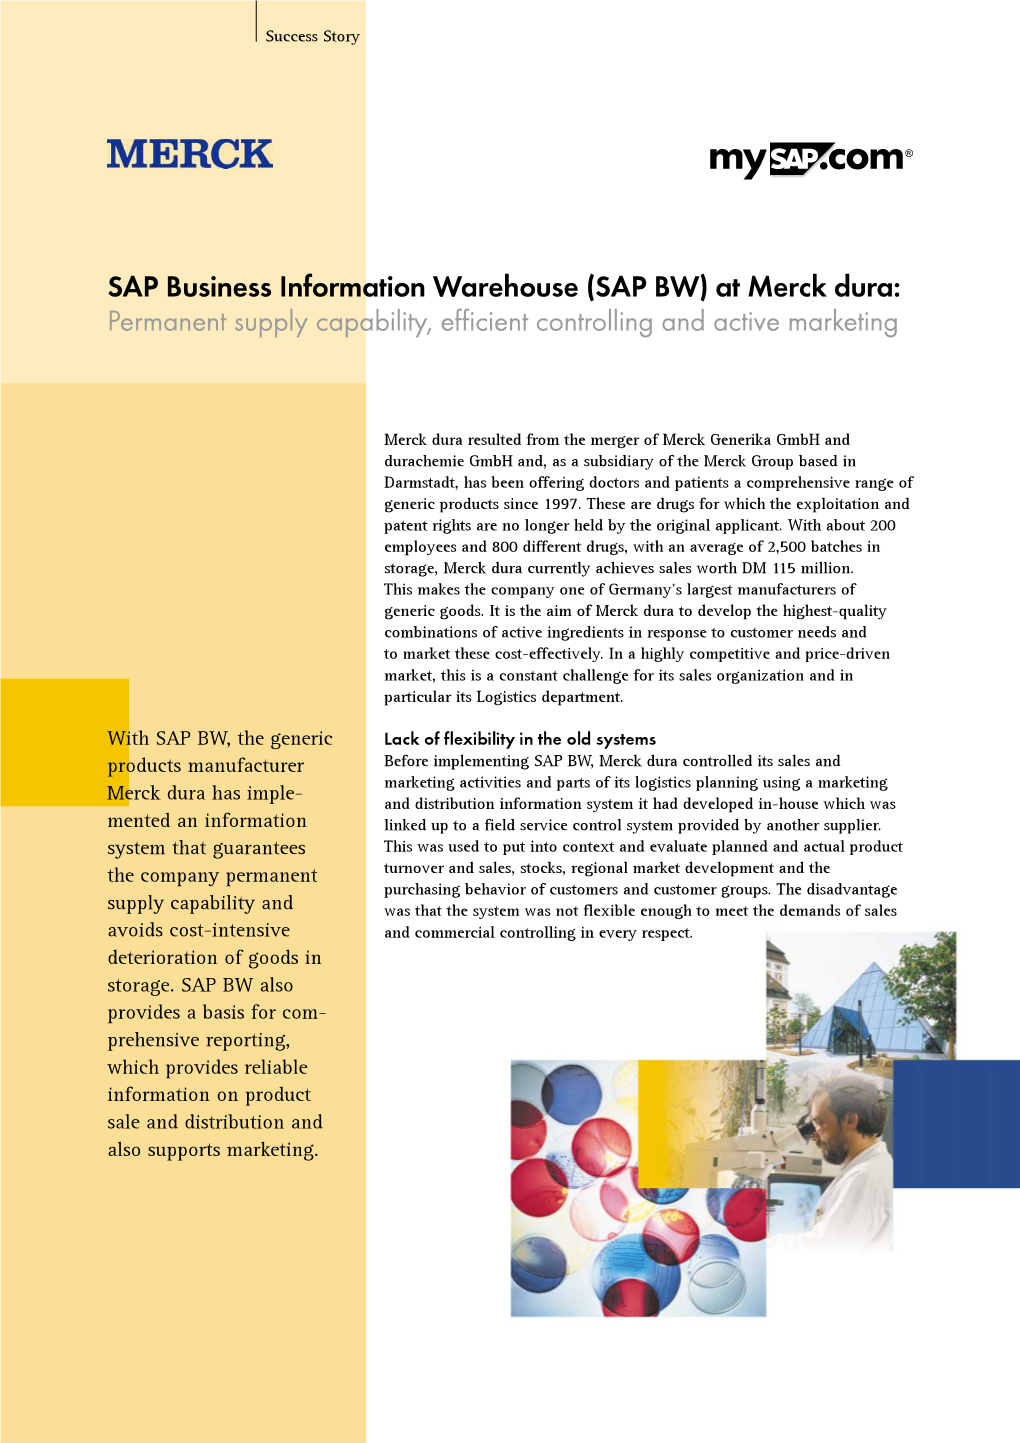 SAP Business Information Warehouse (SAP BW) at Merck Dura: Permanent Supply Capability, Efficient Controlling and Active Marketing